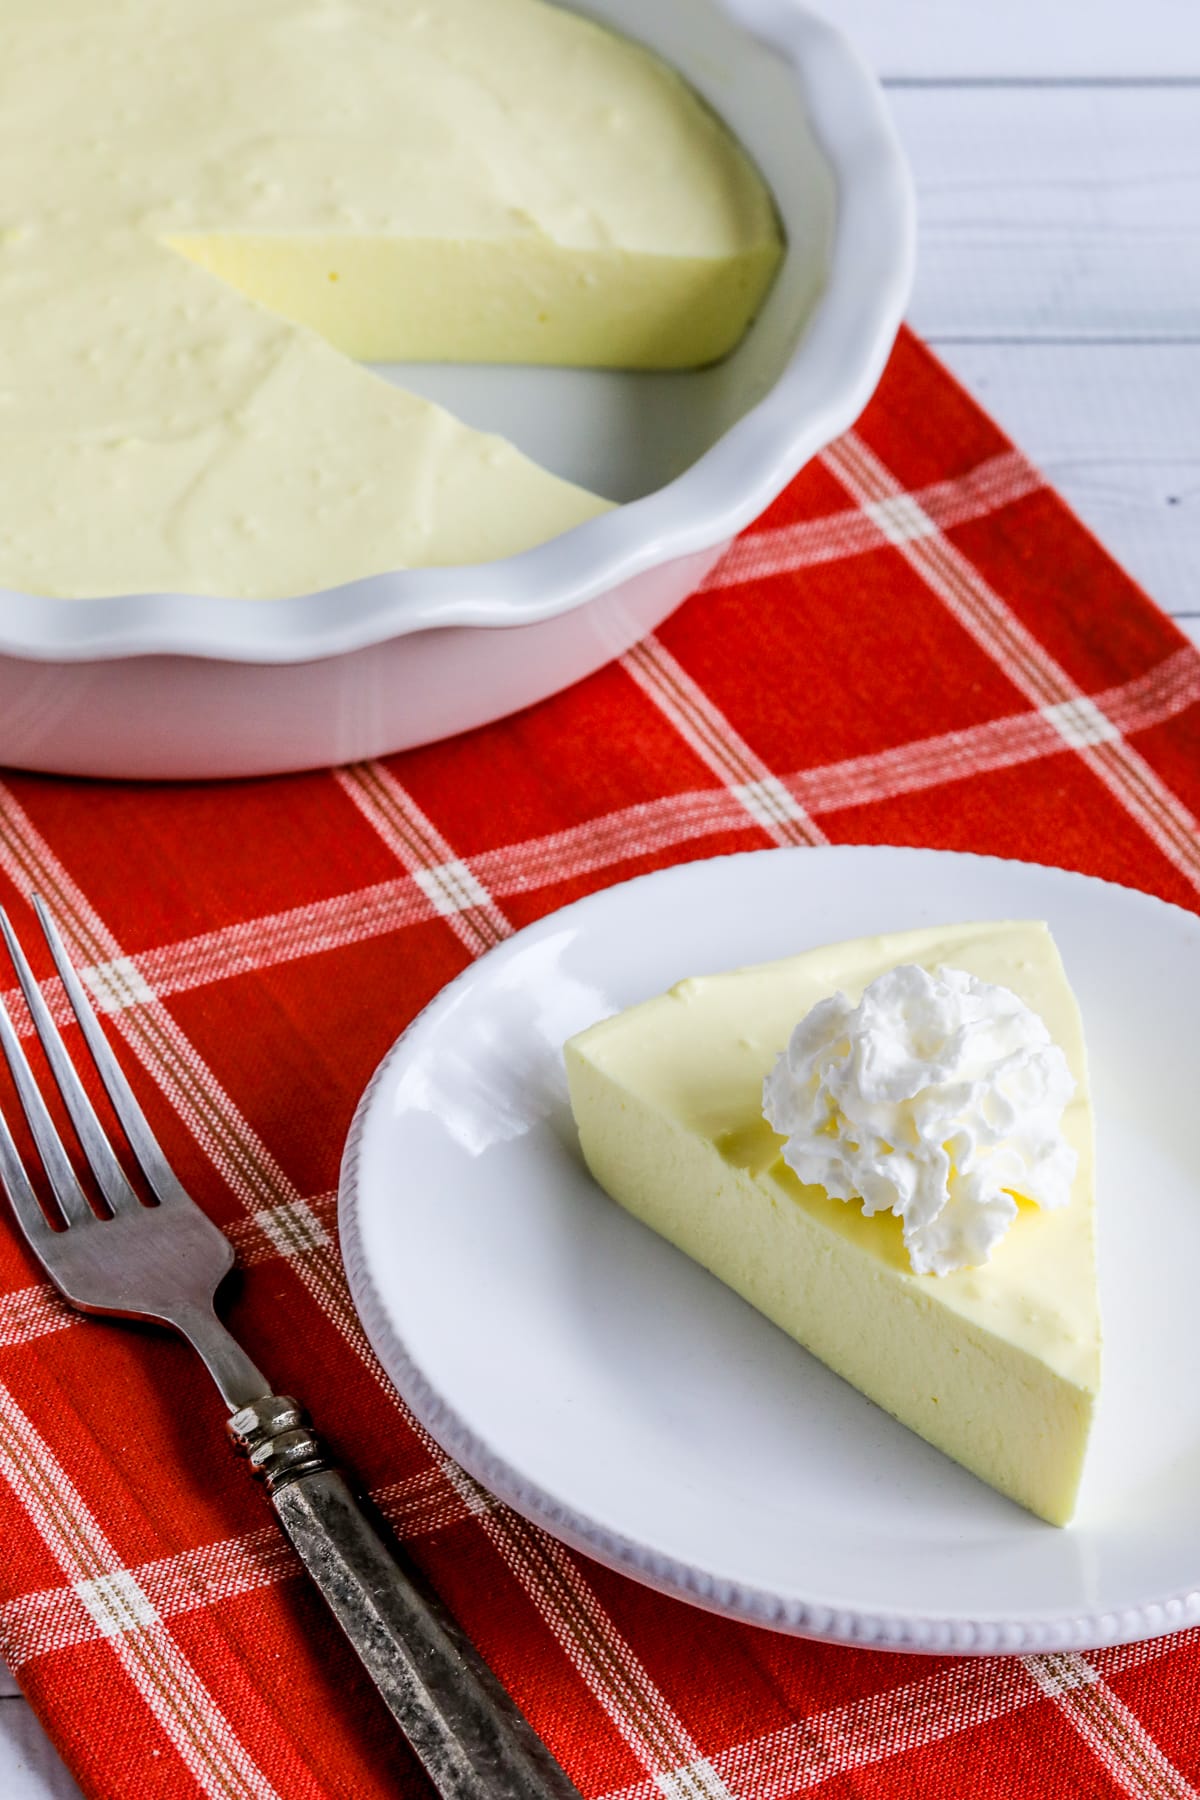 Sugar-Free Jello Yogurt Pie with one piece on plate and cut pie in background.